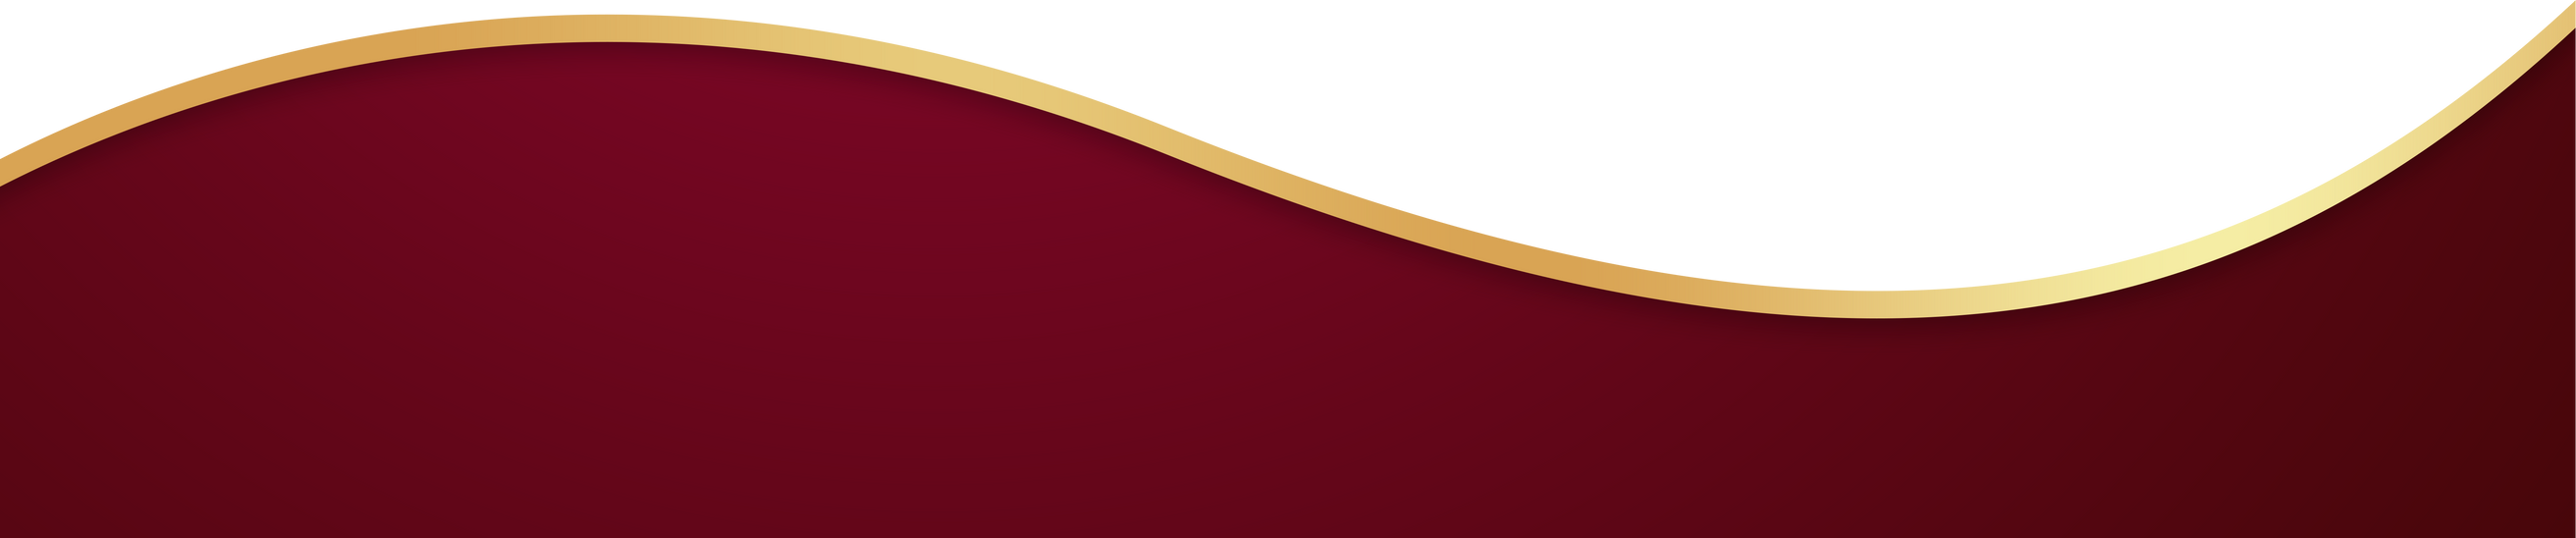 Red and Gold Curve Border. Wavy Banner.